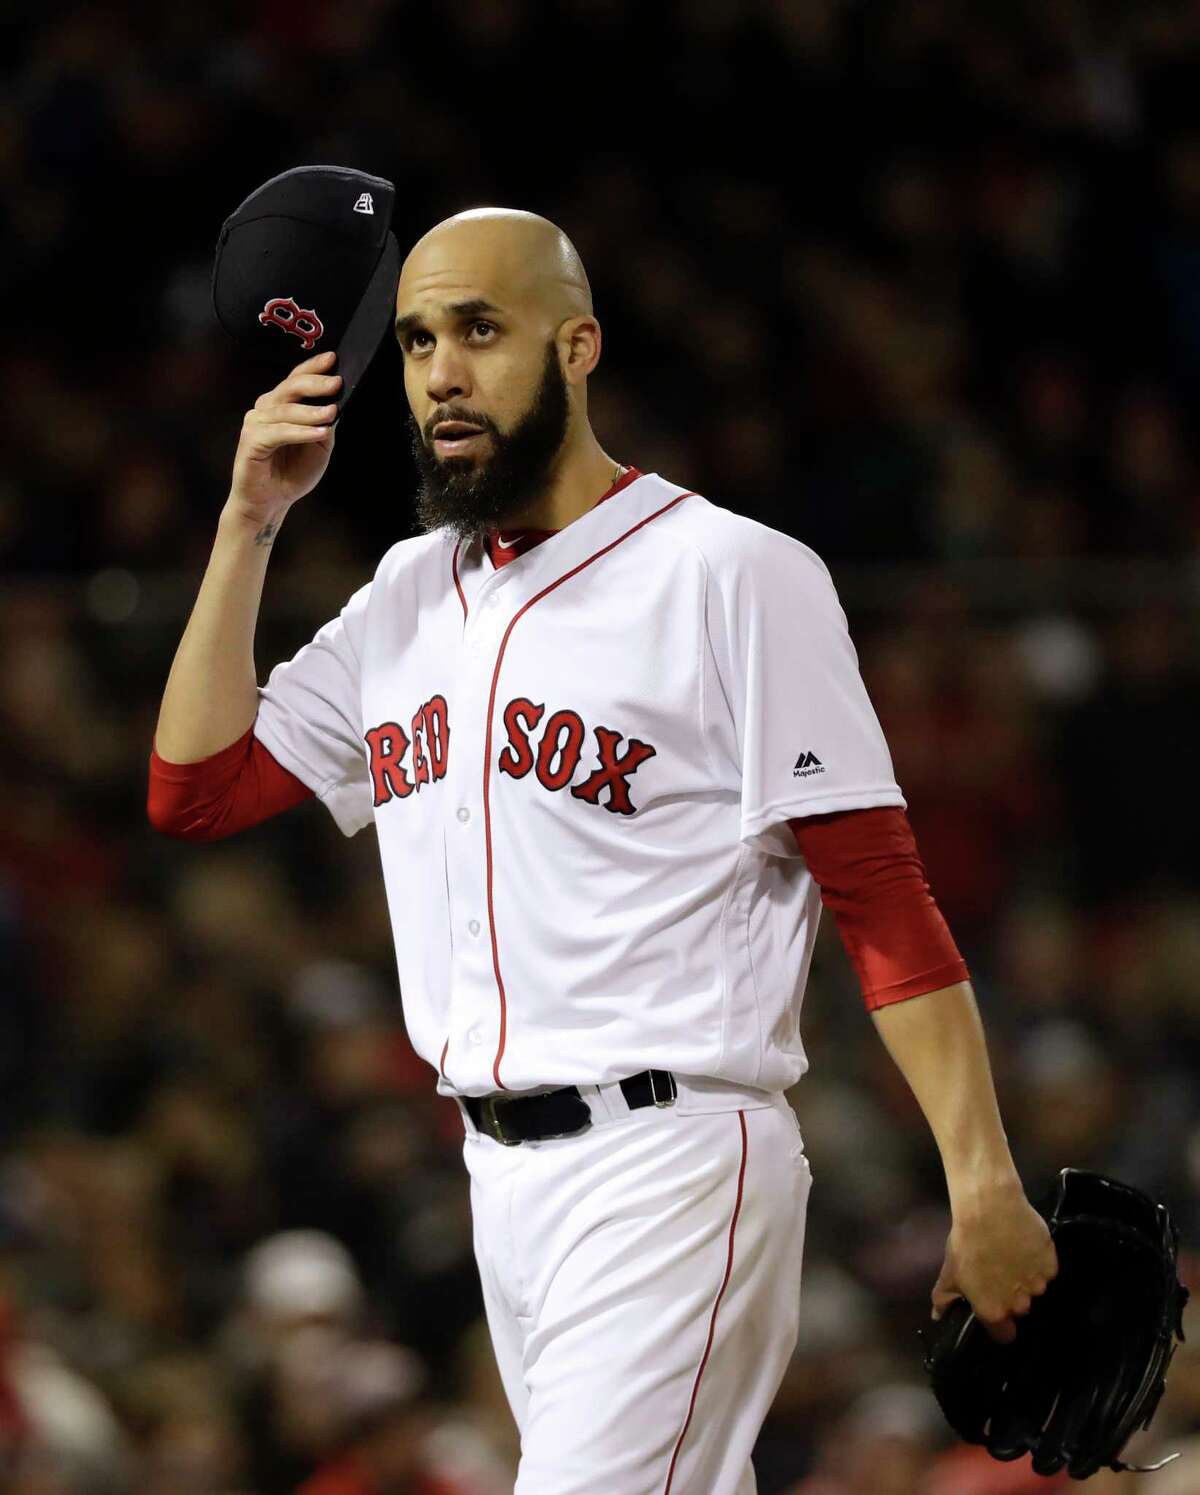 Boston Red Sox's starting pitcher David Price walks off the mound after the first inning of Game 2 of the World Series baseball against the Los Angeles Dodgers game Wednesday, Oct. 24, 2018, in Boston.